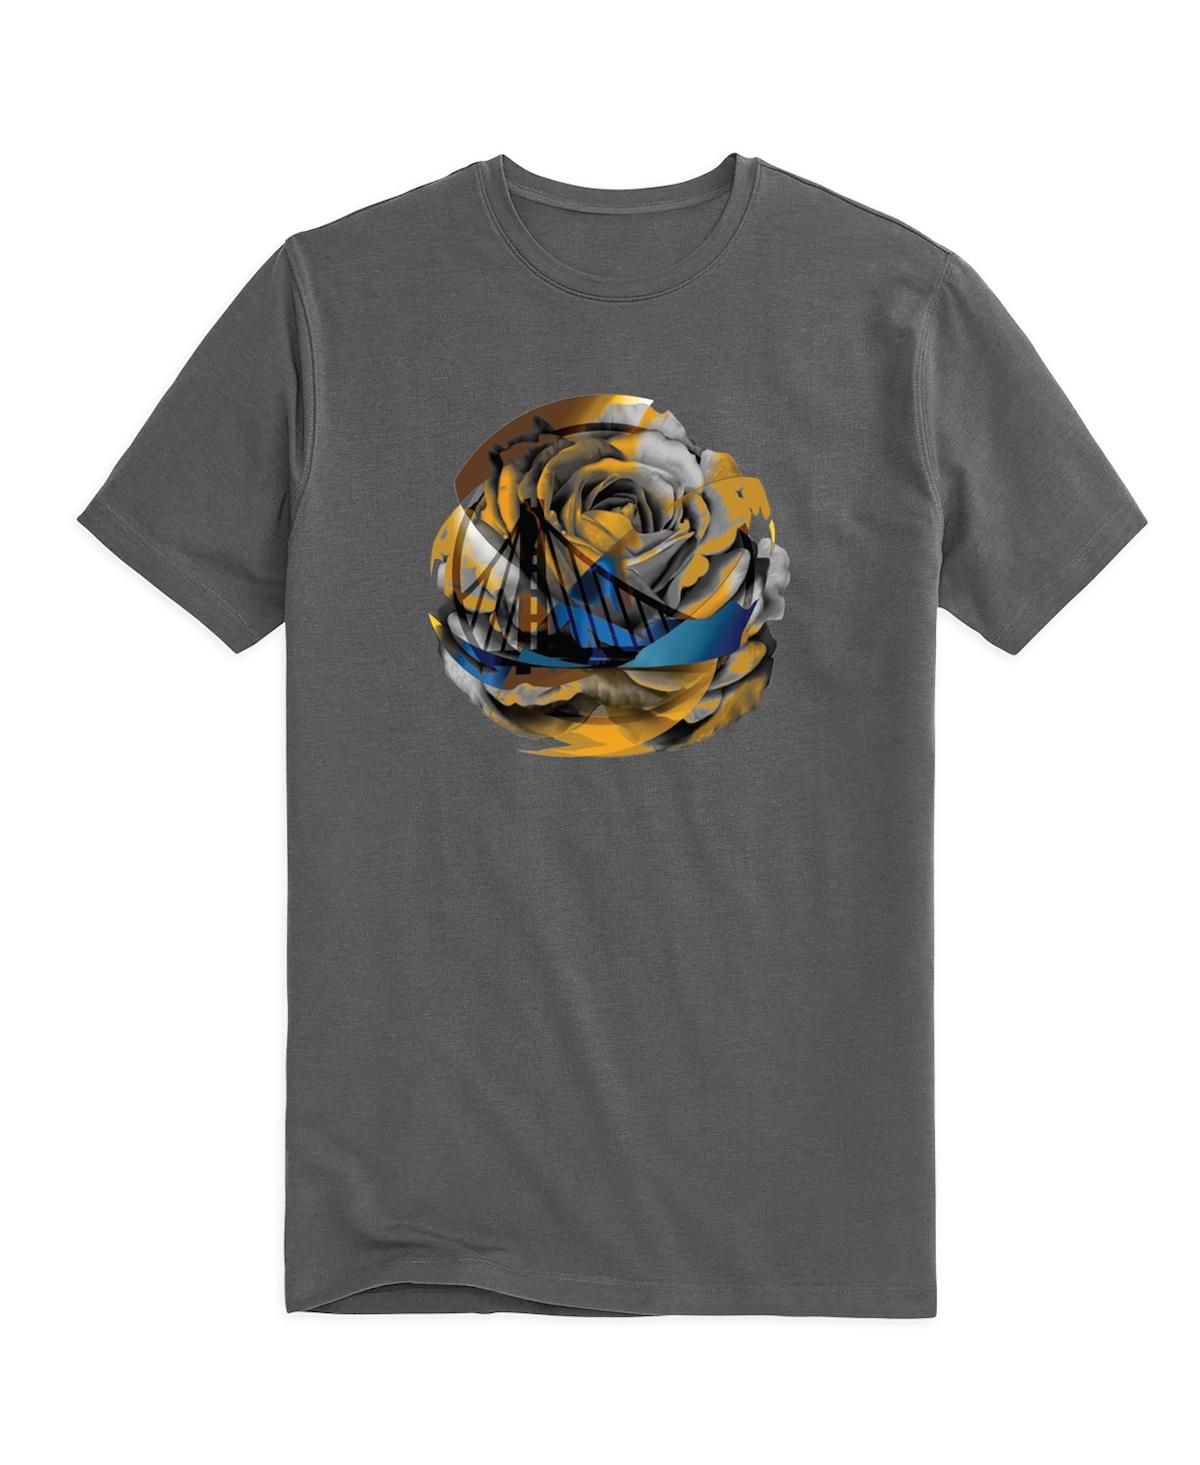 Shop The Wild Collective Men's And Women's  Charcoal Golden State Warriors 2022/23 City Edition T-shirt